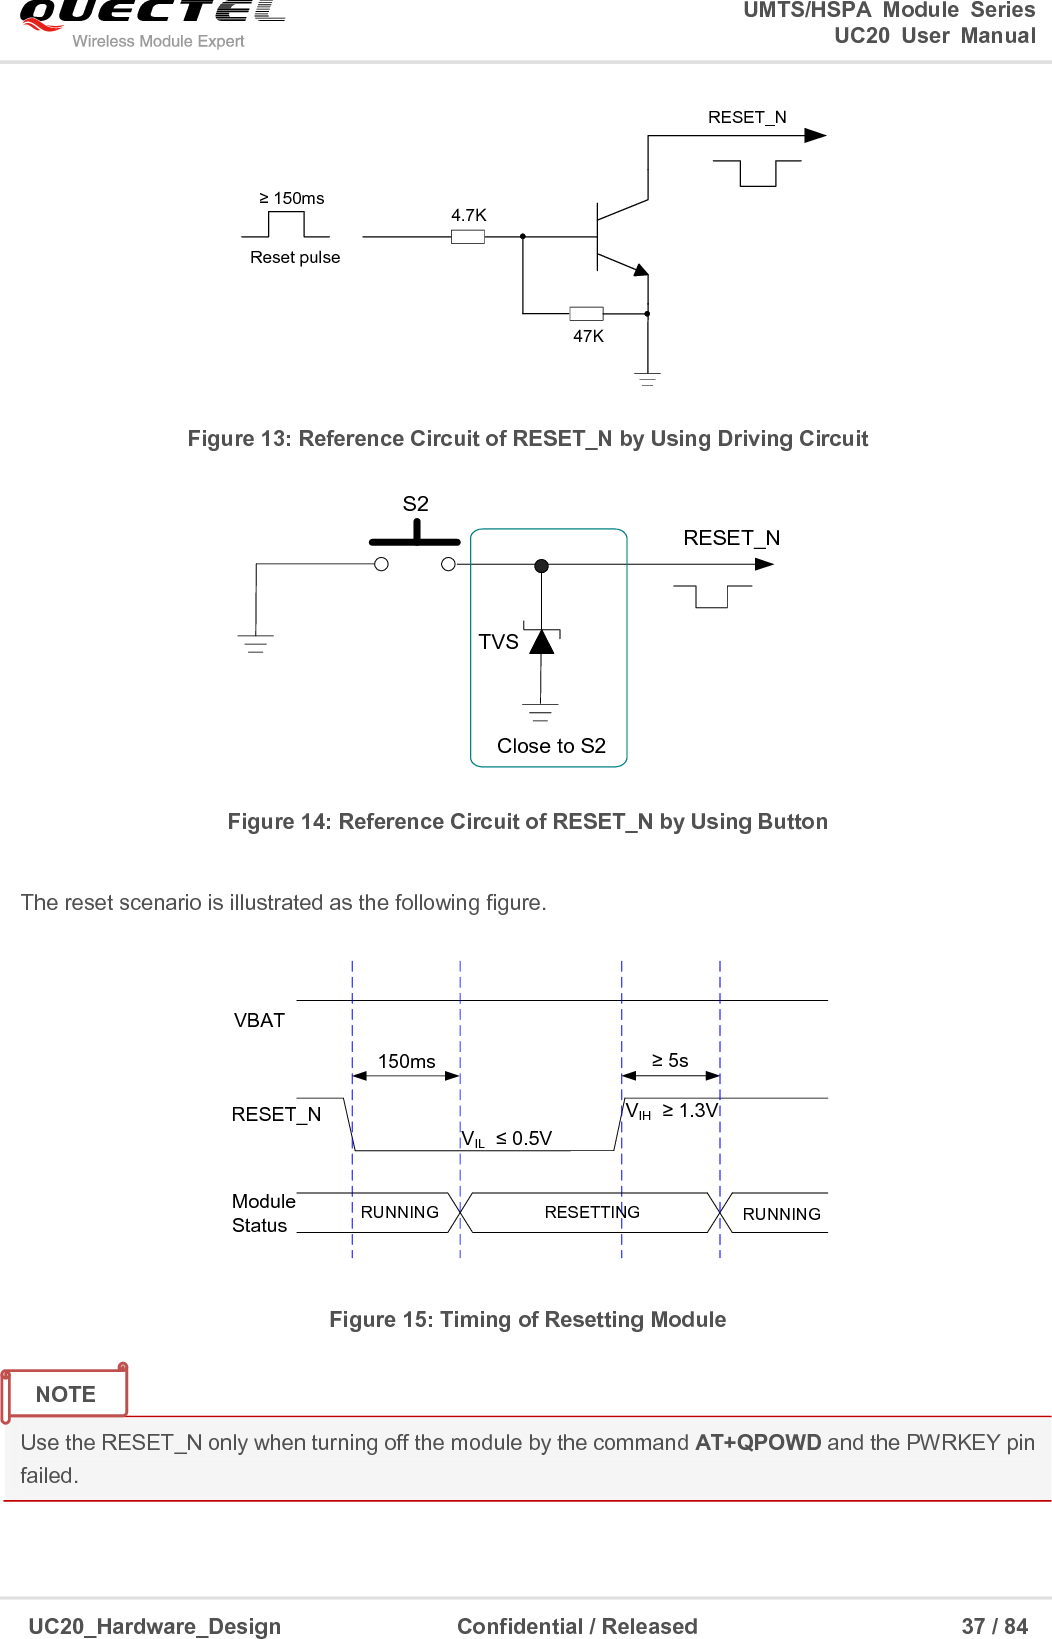                                                                                                                                               UMTS/HSPA  Module  Series                                                                 UC20  User  Manual  UC20_Hardware_Design                  Confidential / Released                            37 / 84     Reset pulseRESET_N4.7K47K≥ 150ms Figure 13: Reference Circuit of RESET_N by Using Driving Circuit RESET_NS2Close to S2TVS Figure 14: Reference Circuit of RESET_N by Using Button  The reset scenario is illustrated as the following figure. VIL  ≤ 0.5VVIH  ≥ 1.3VVBAT150msRESETTINGModule Status RUNNINGRESET_NRUNNING≥ 5s Figure 15: Timing of Resetting Module  Use the RESET_N only when turning off the module by the command AT+QPOWD and the PWRKEY pin failed.   NOTE 